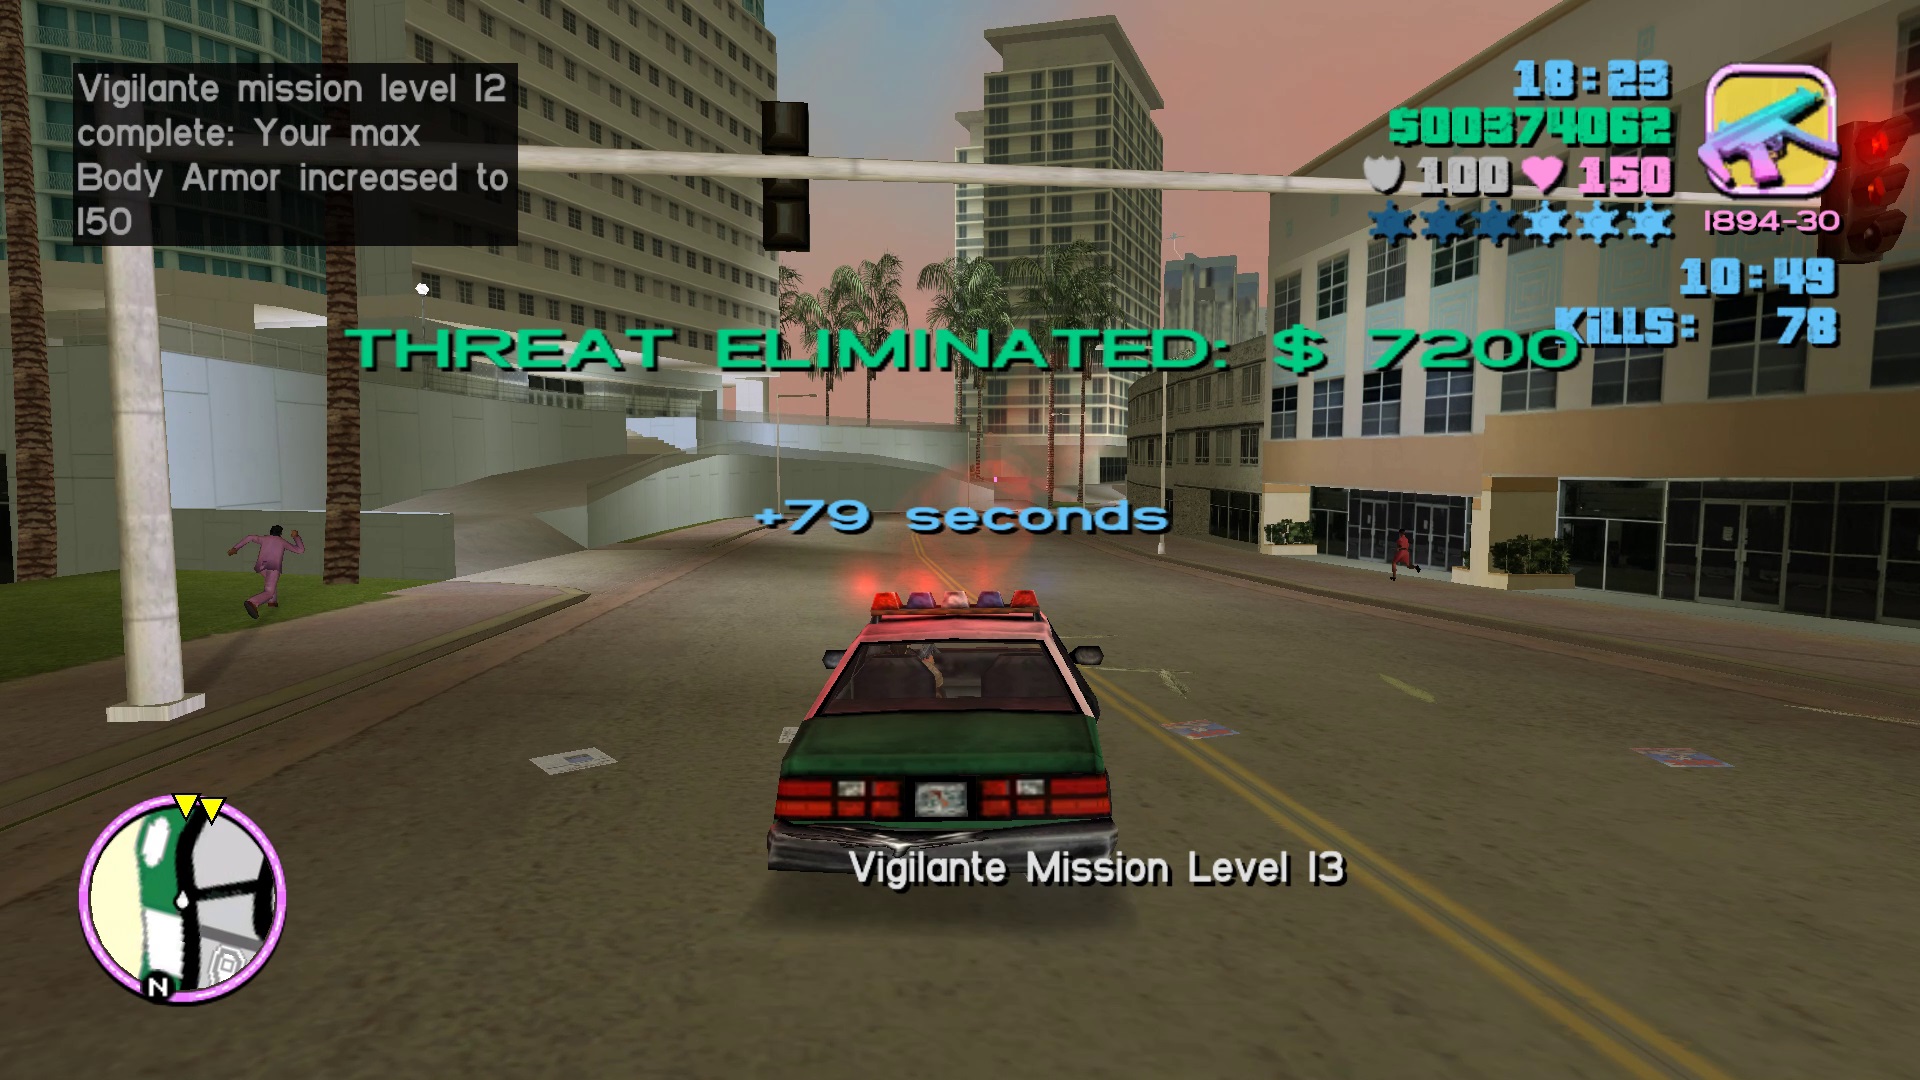 GTA Vice City: Where to get secret vehicles like the armored